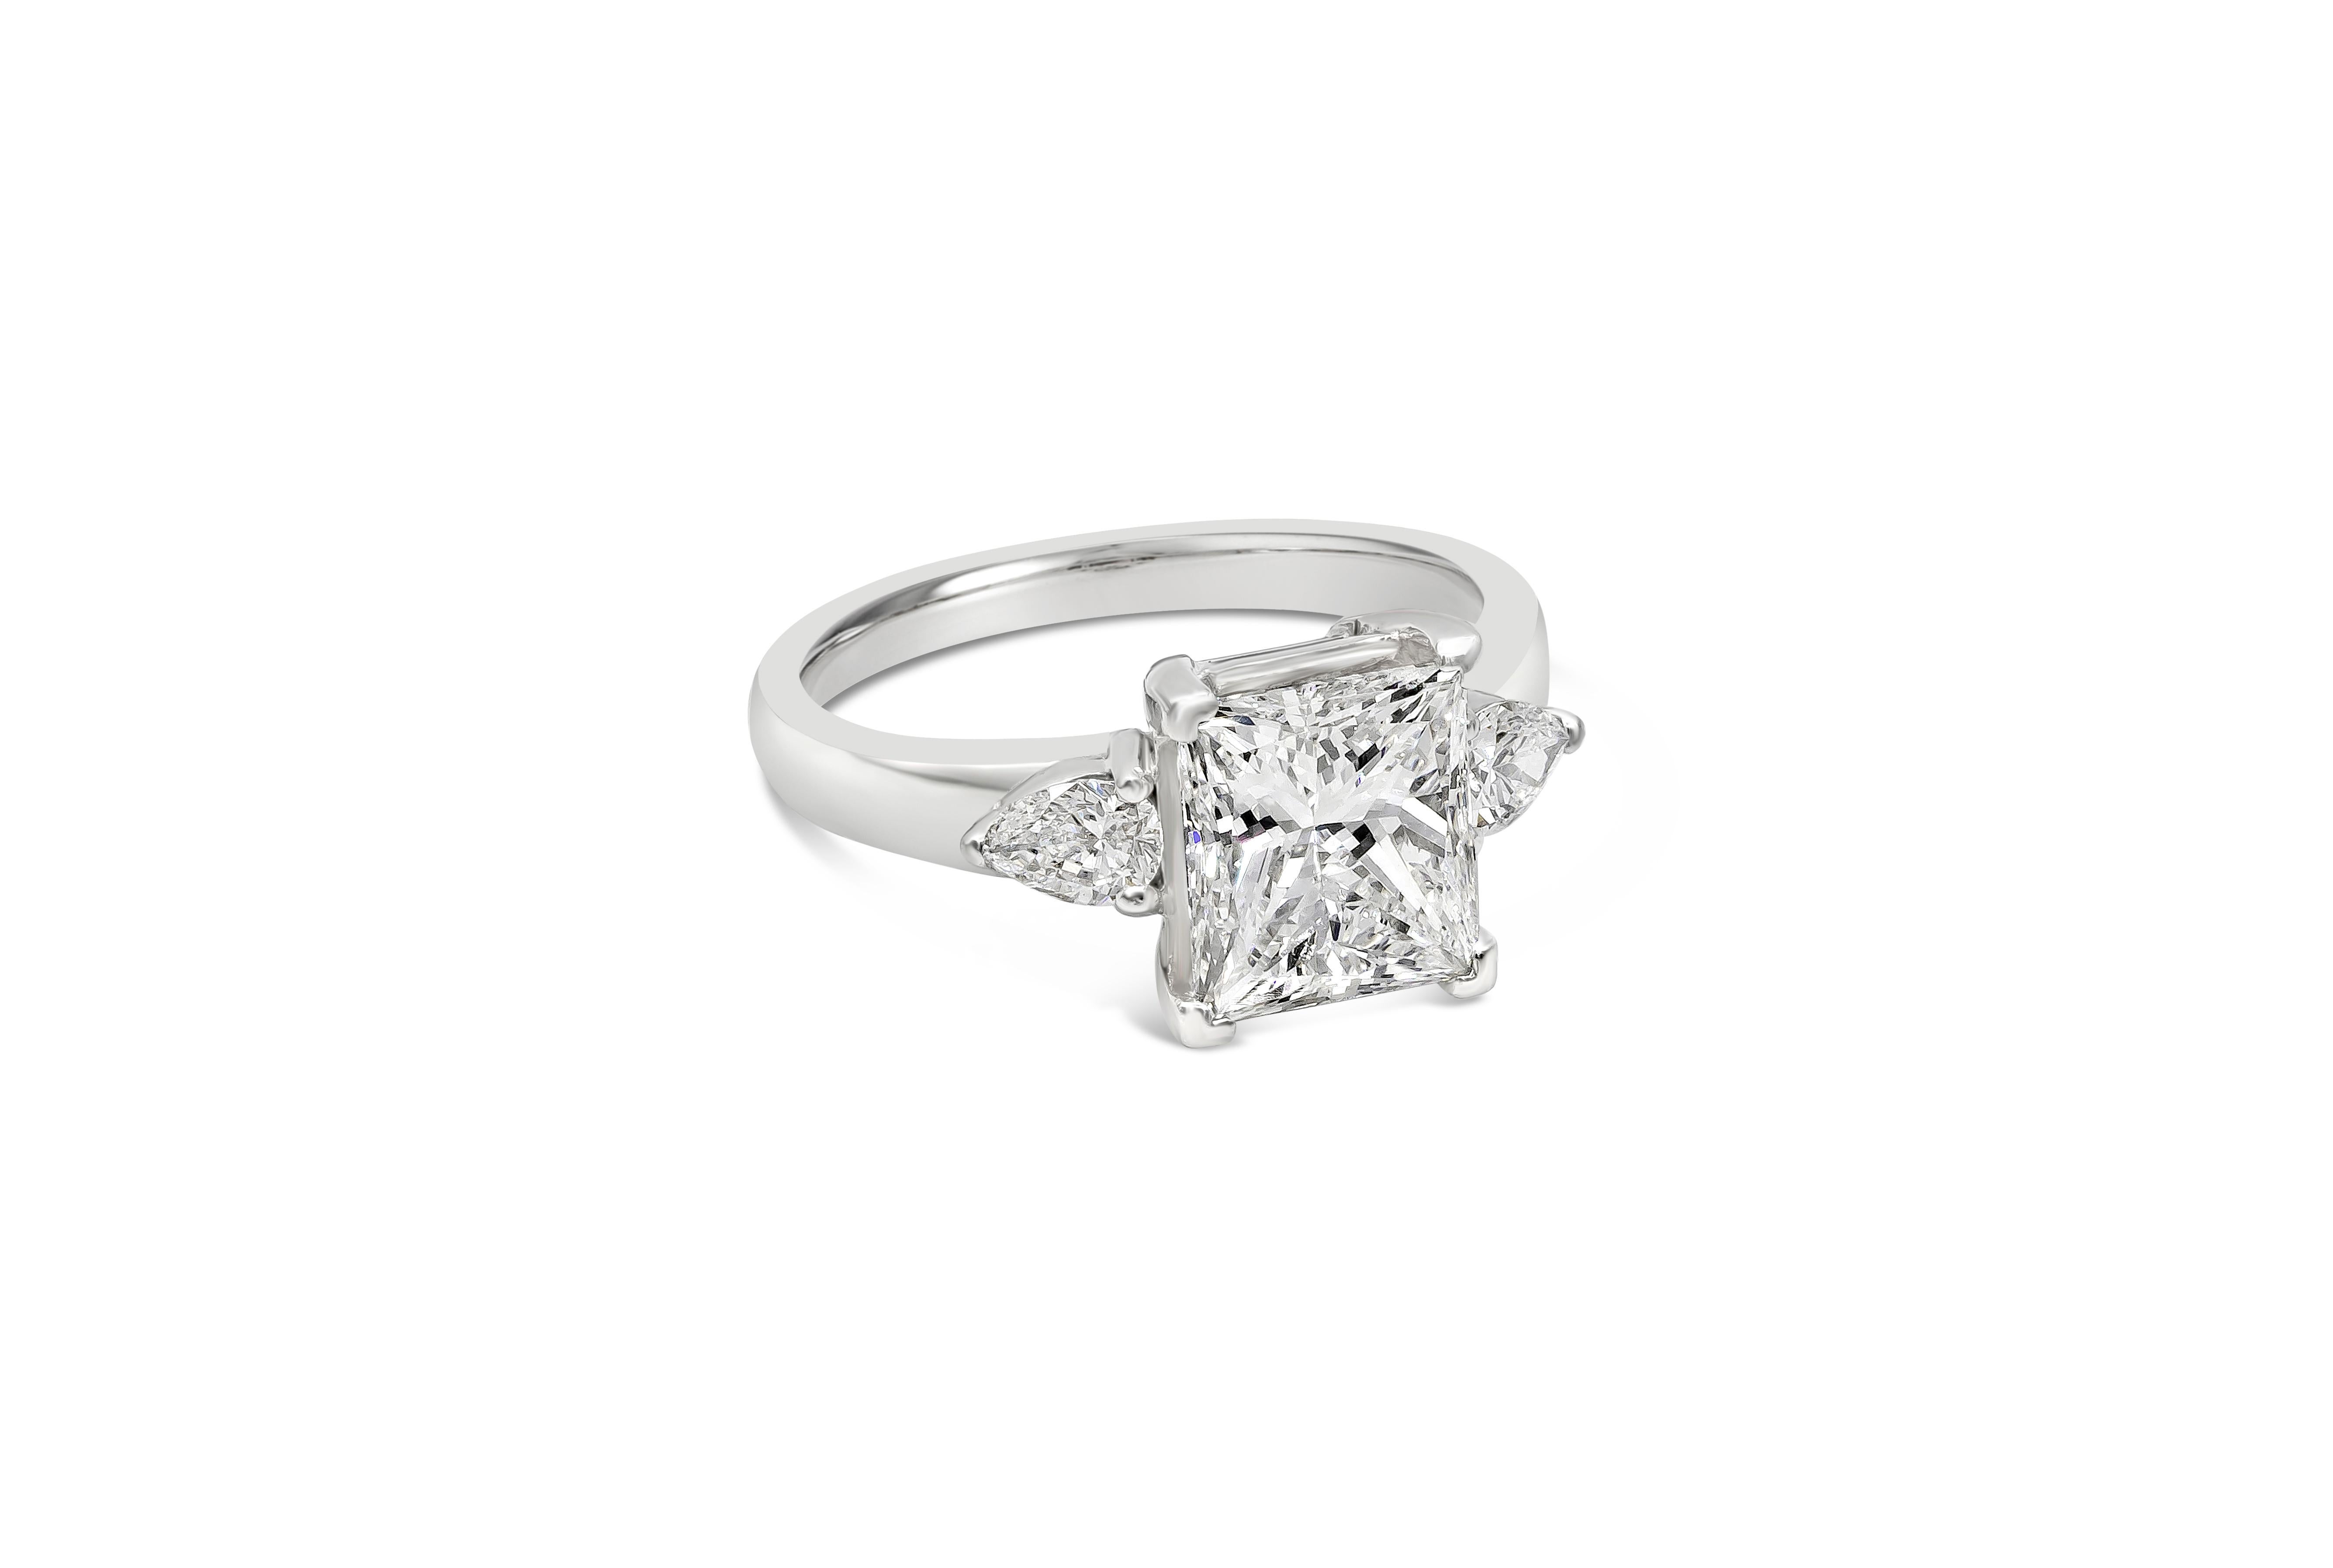 A beautiful engagement ring style showcasing a brilliant princess cut diamond certified by GIA as F color, VS2 clarity. Flanking the center diamond are brilliant pear shape diamonds weighing 0.40 carats total. Set in an everlasting platinum